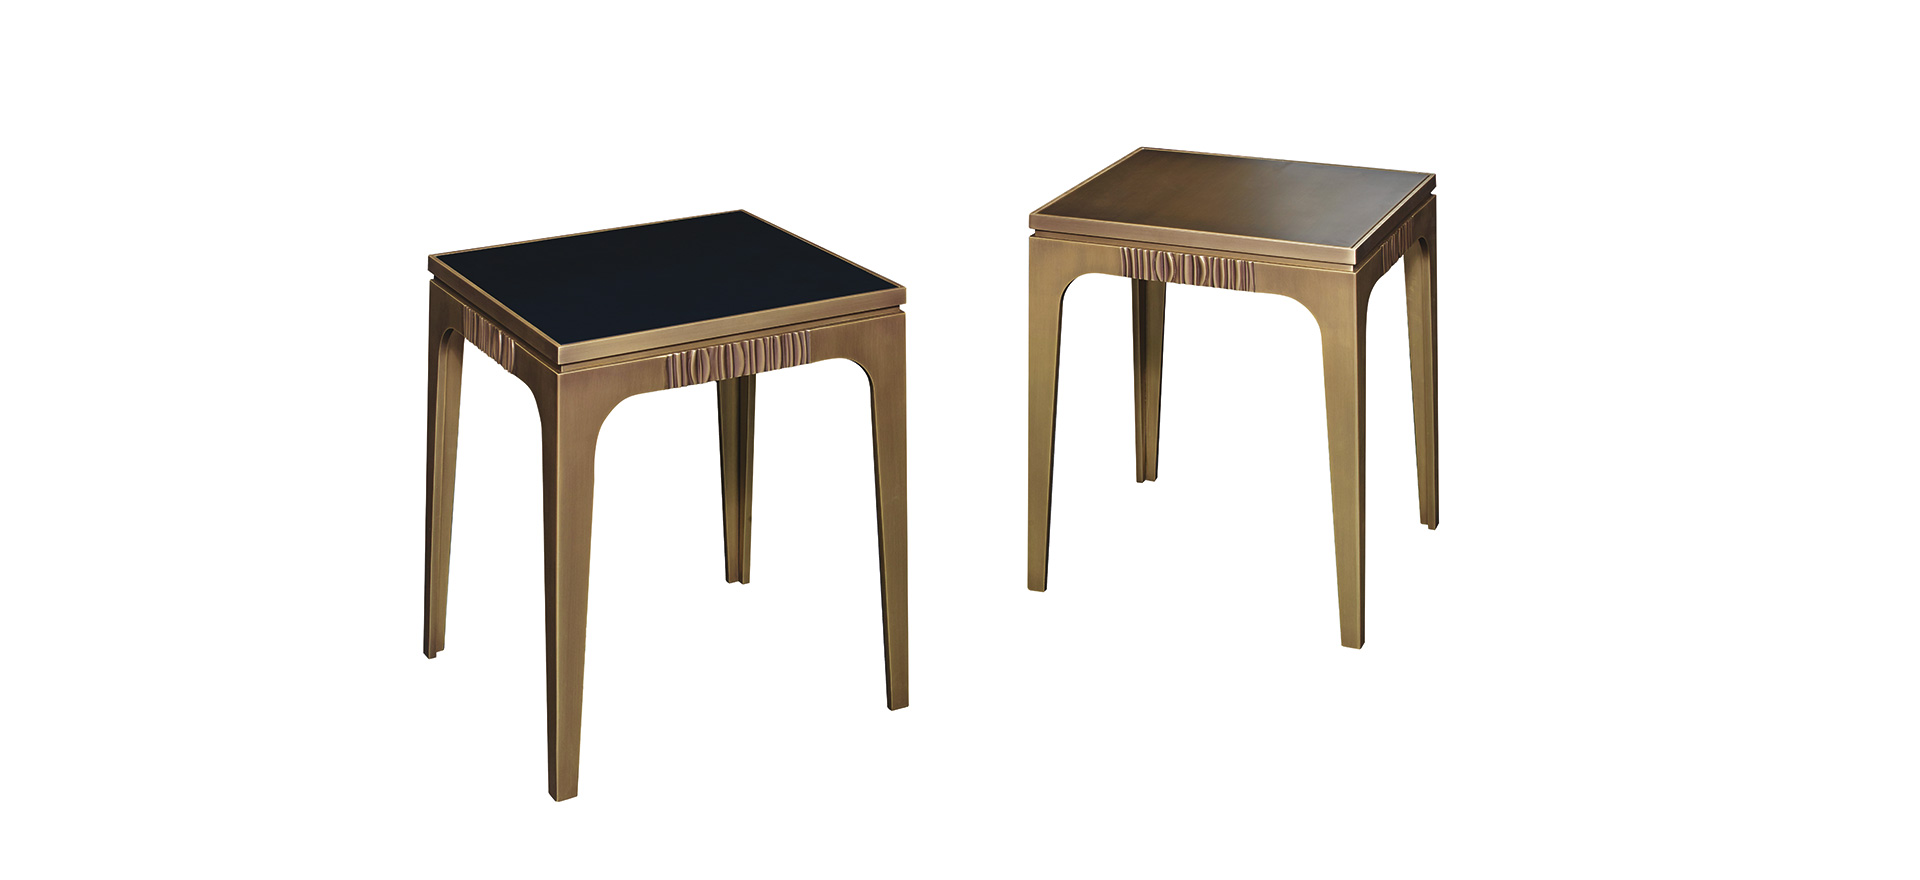 Lowndes is a bronze small table with bronze details, from Promemoria's The Londong Collection | Promemoria